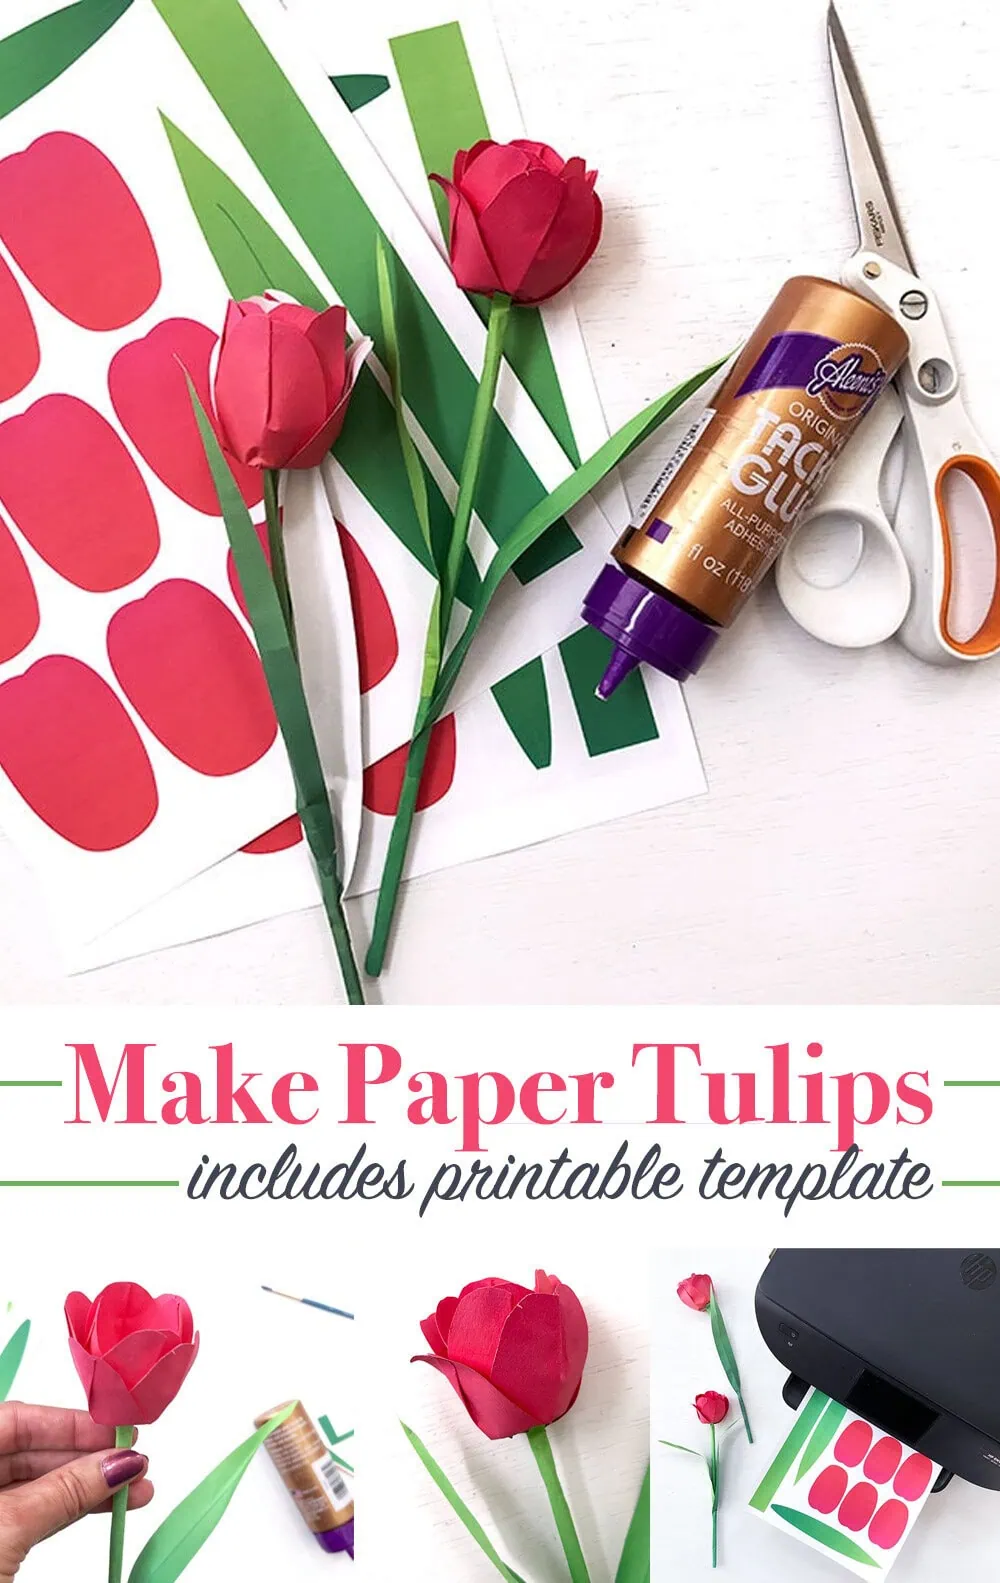 Paper tulips with printable template for crafting.